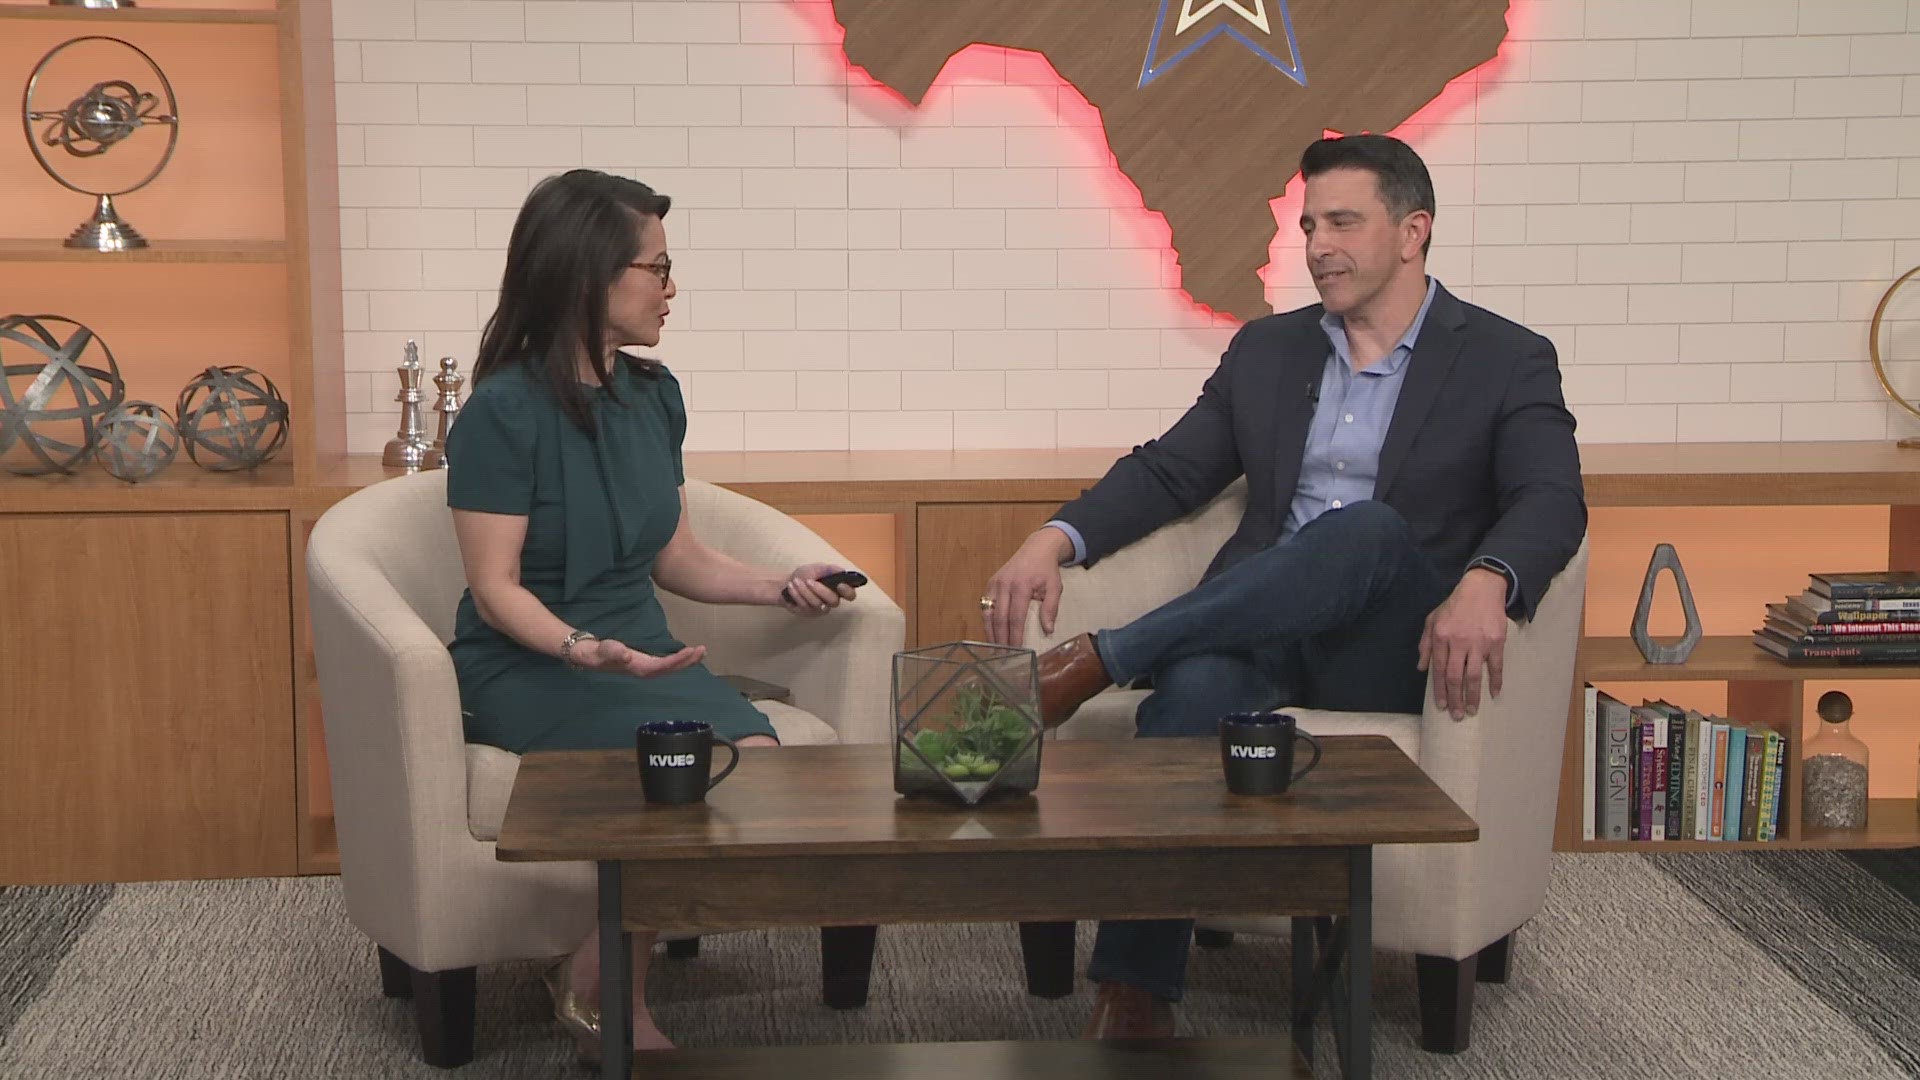 Col. Martin Salinas, SPARK division chief, joined KVUE Midday to discuss the Air Force Research Laboratory's involvement with South by Southwest.